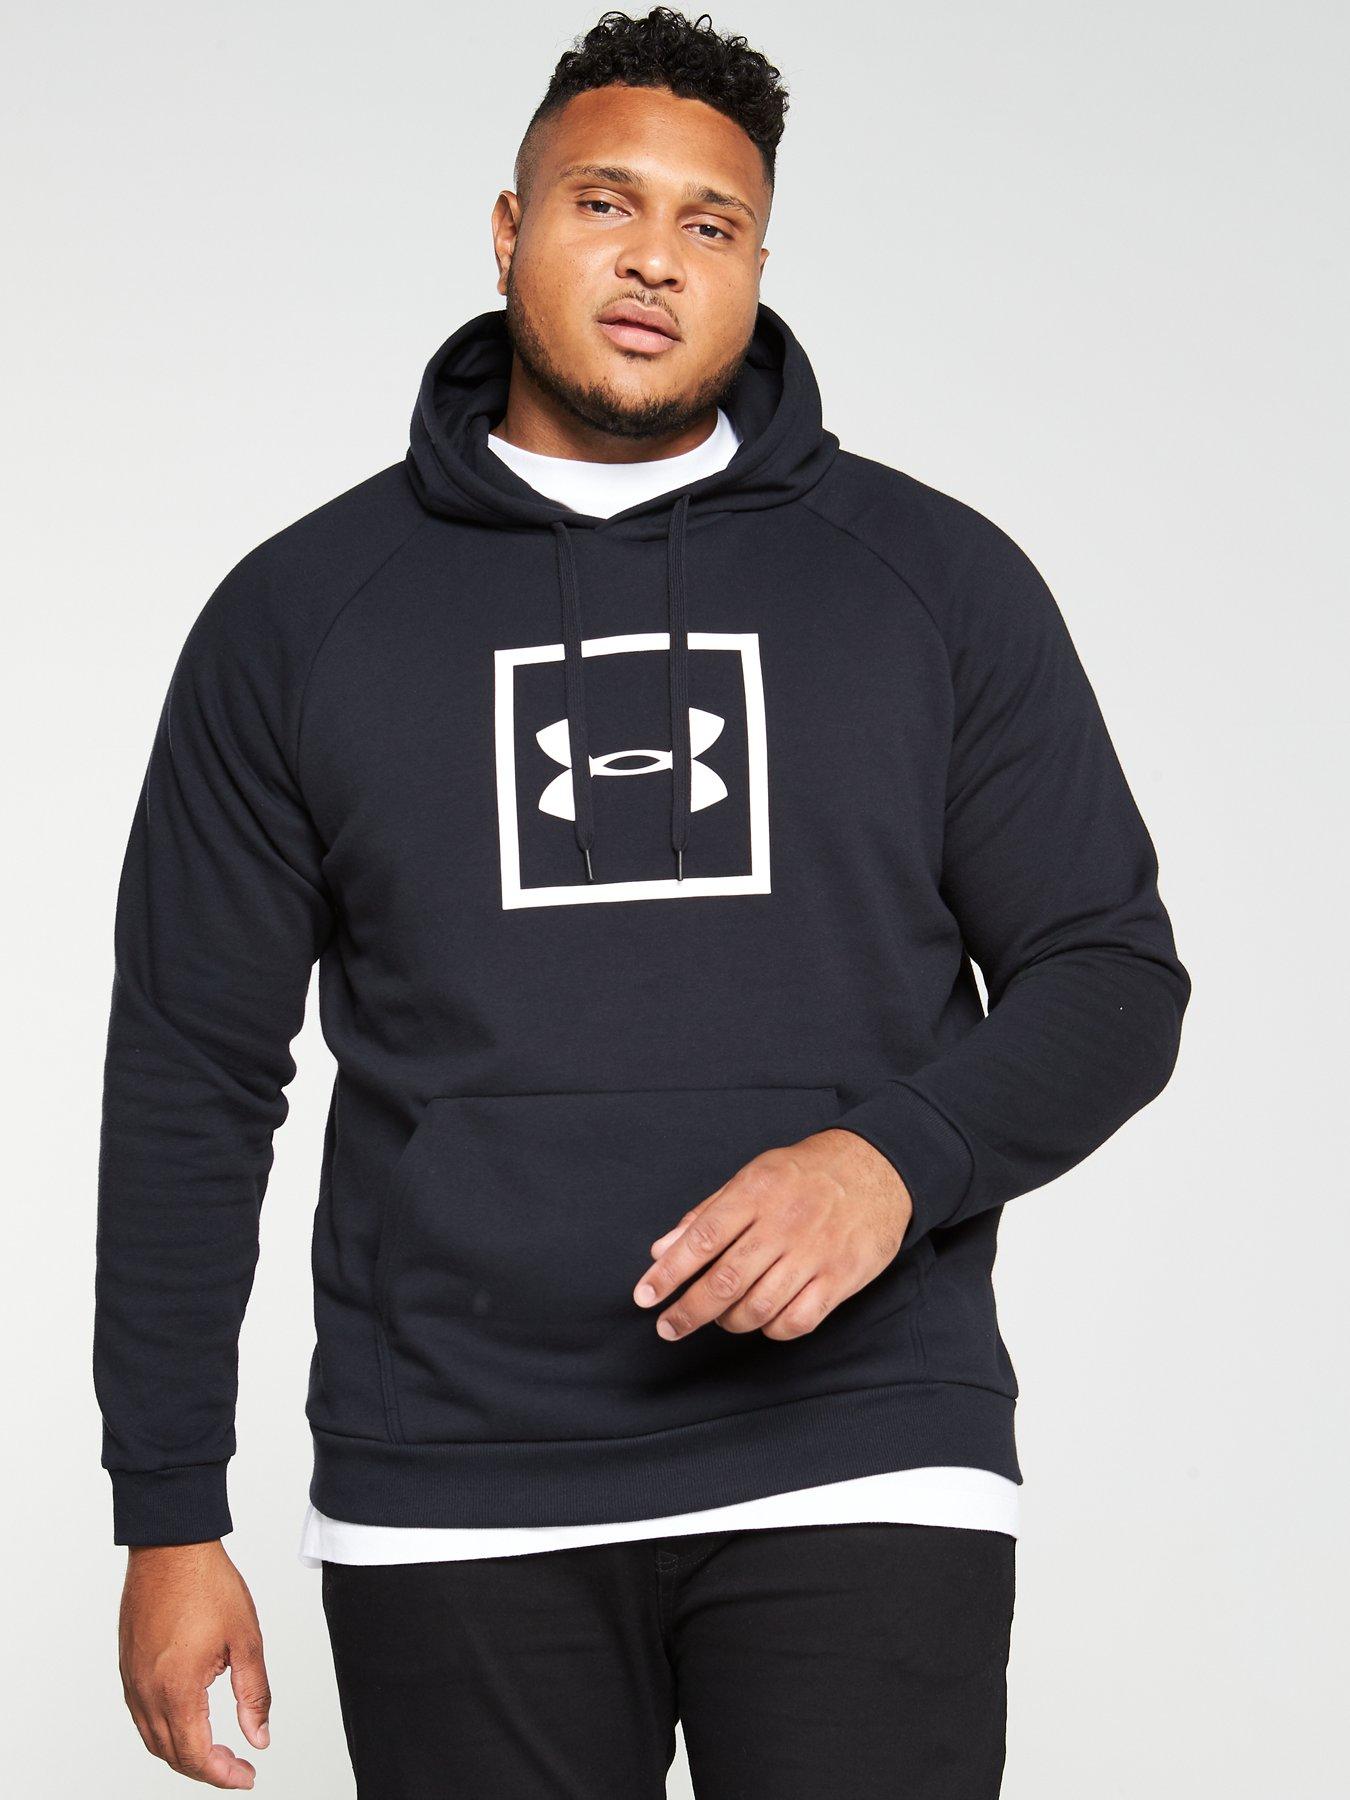 Details about   UNDER ARMOUR RIVAL FLEECE BOX LOGO HOODIE MENS SPORTS FITNESS HOODY JUMPER 